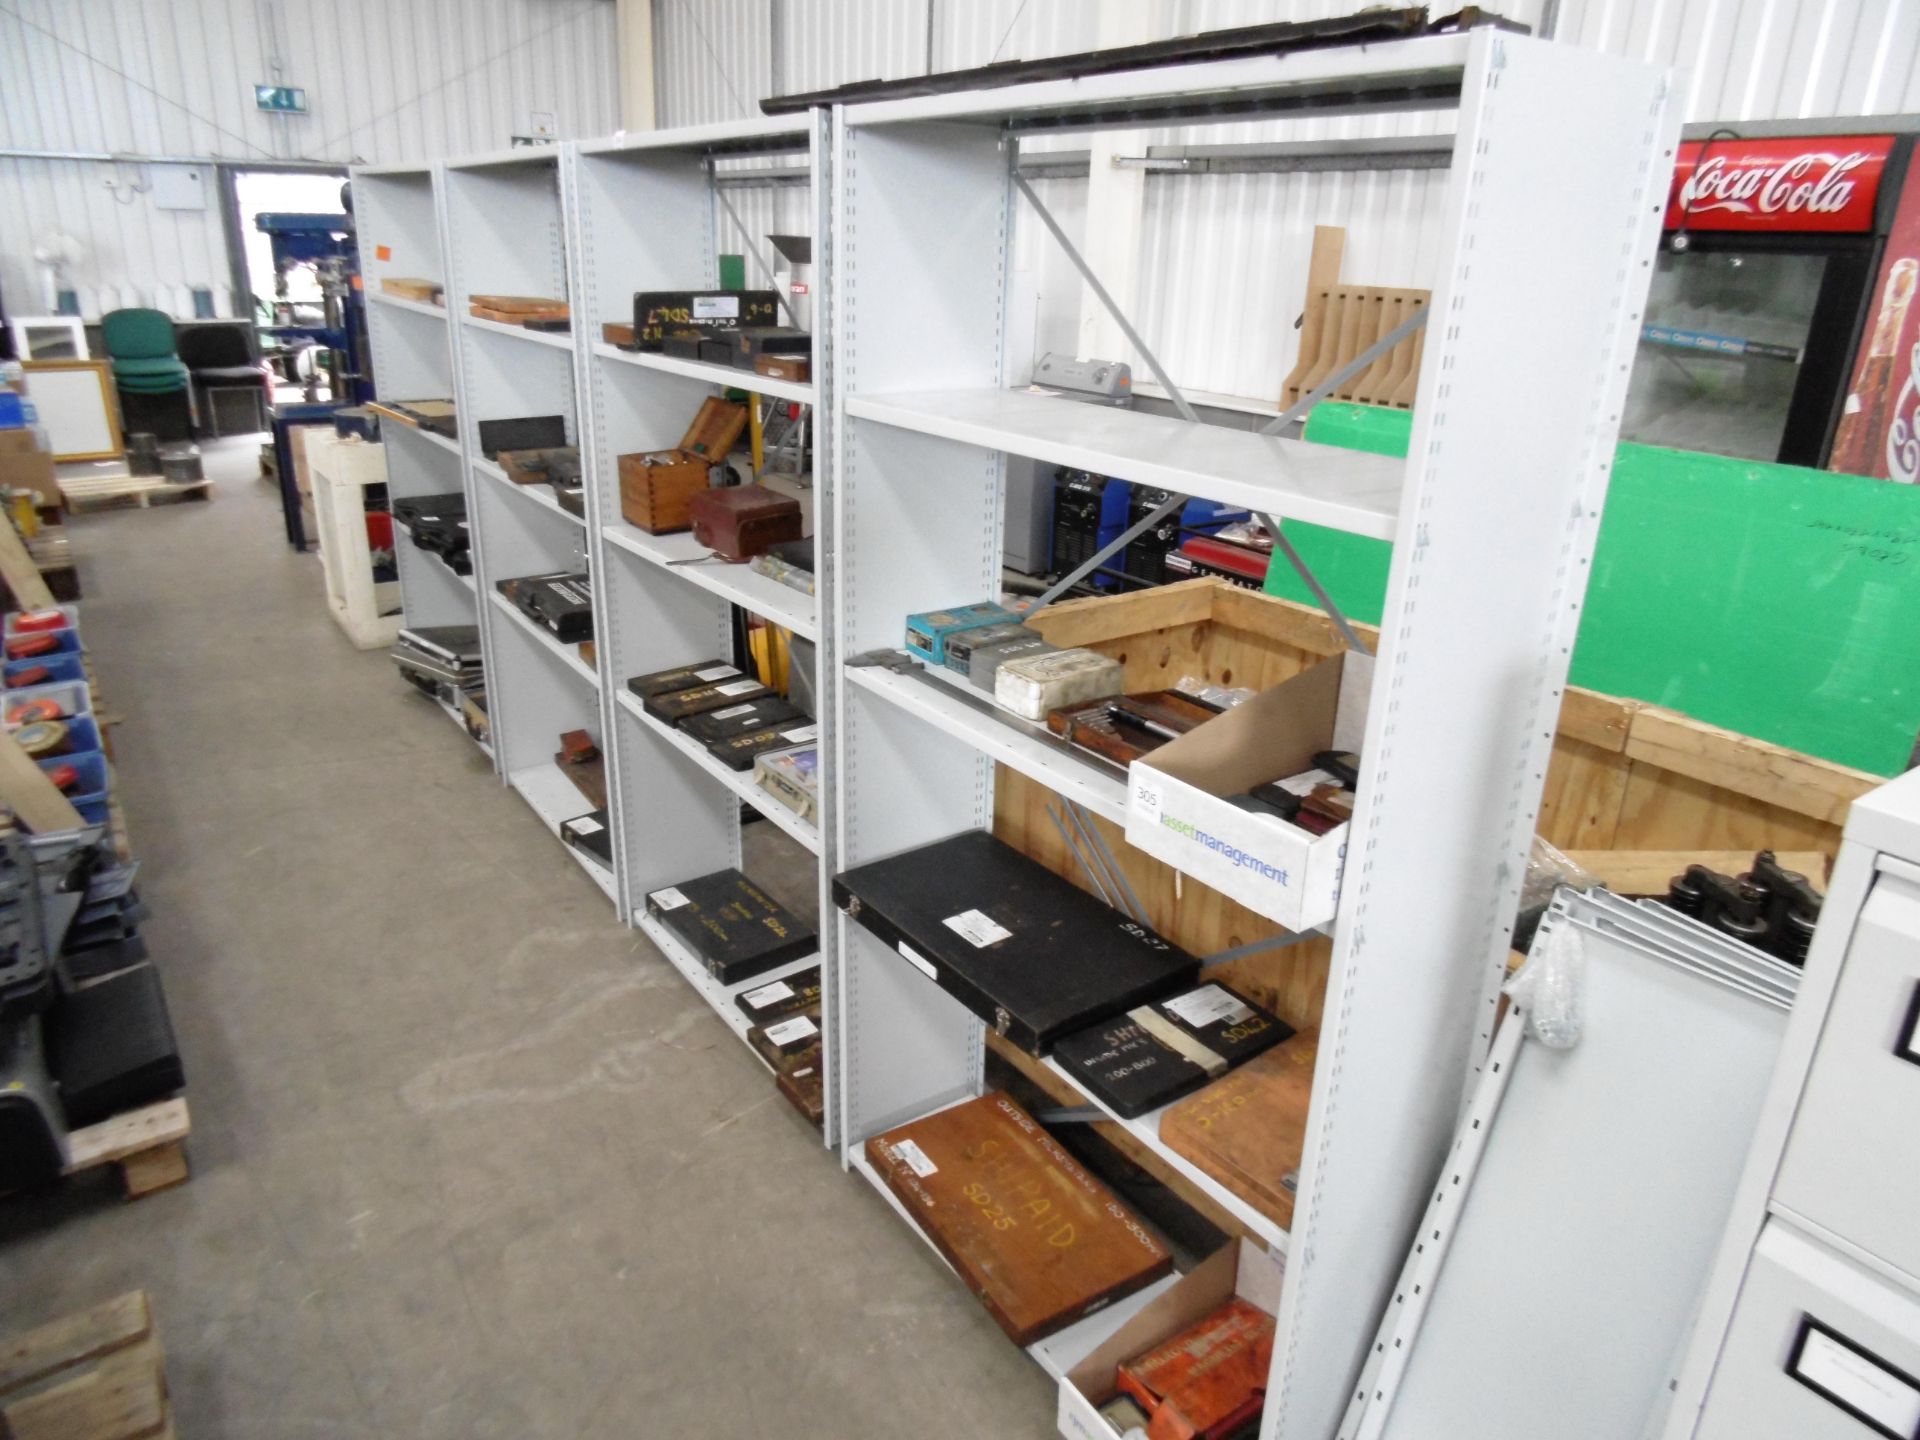 * 4 x Metal shelving units c/w extra shelves (items on shelves not included)